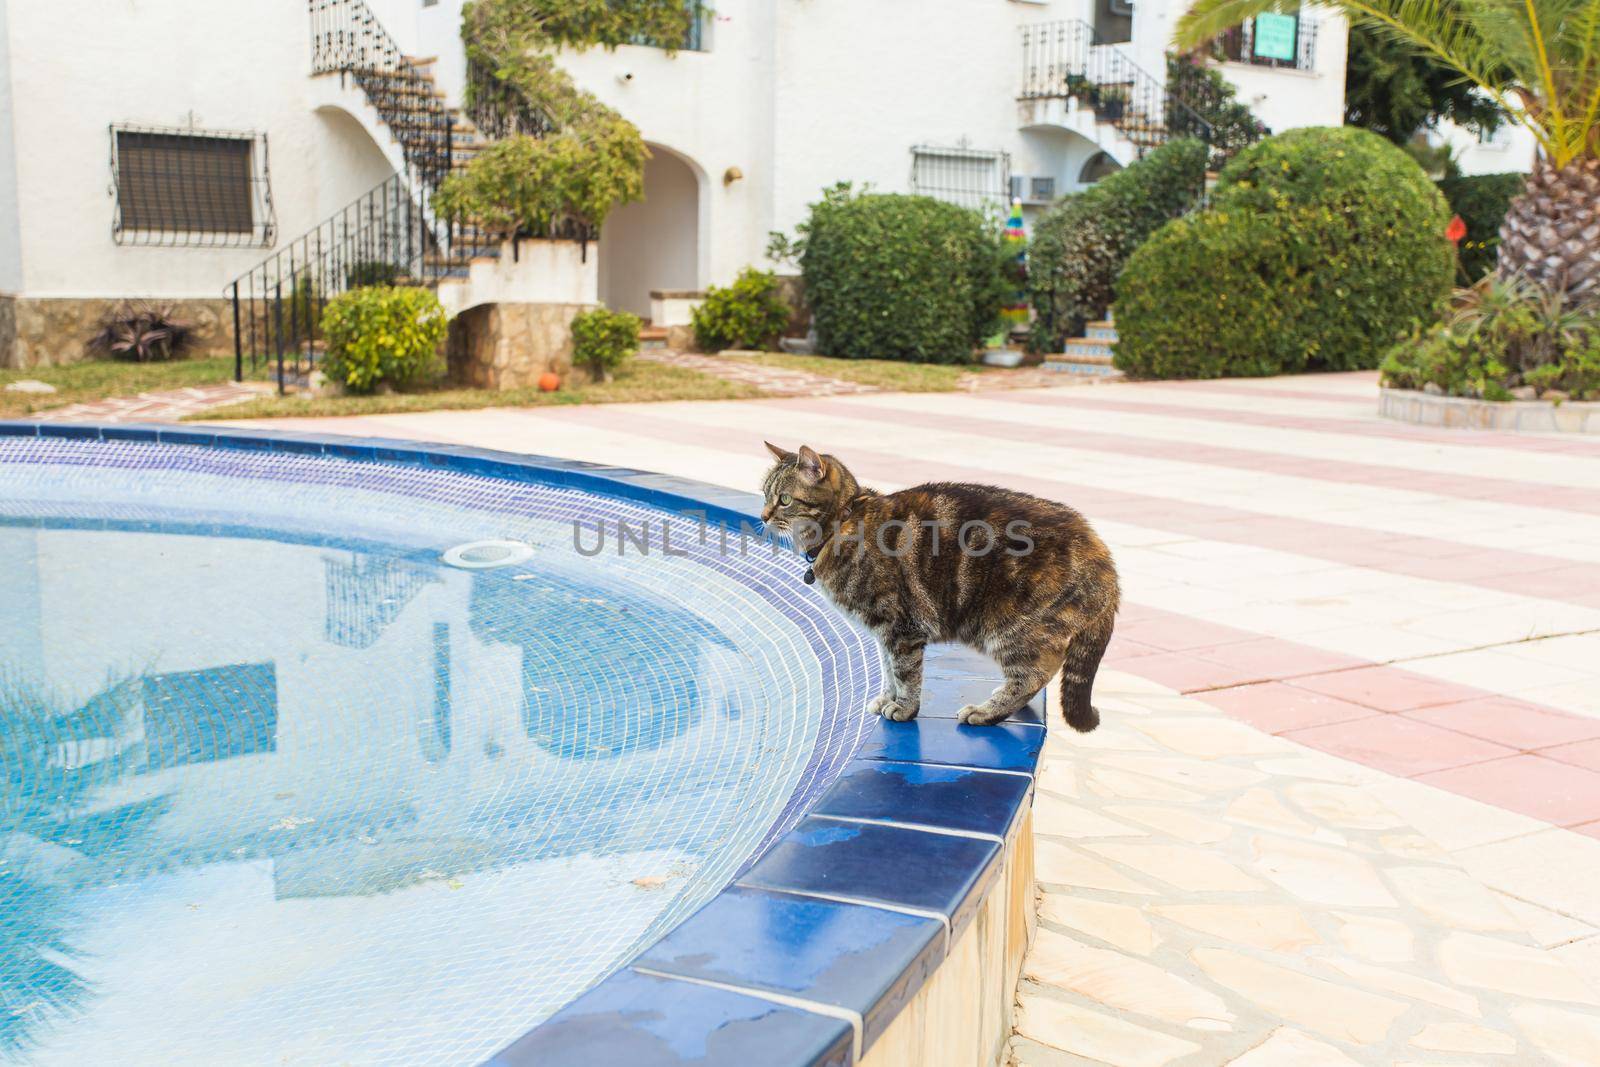 Cute cat drinking water from swimming pool.